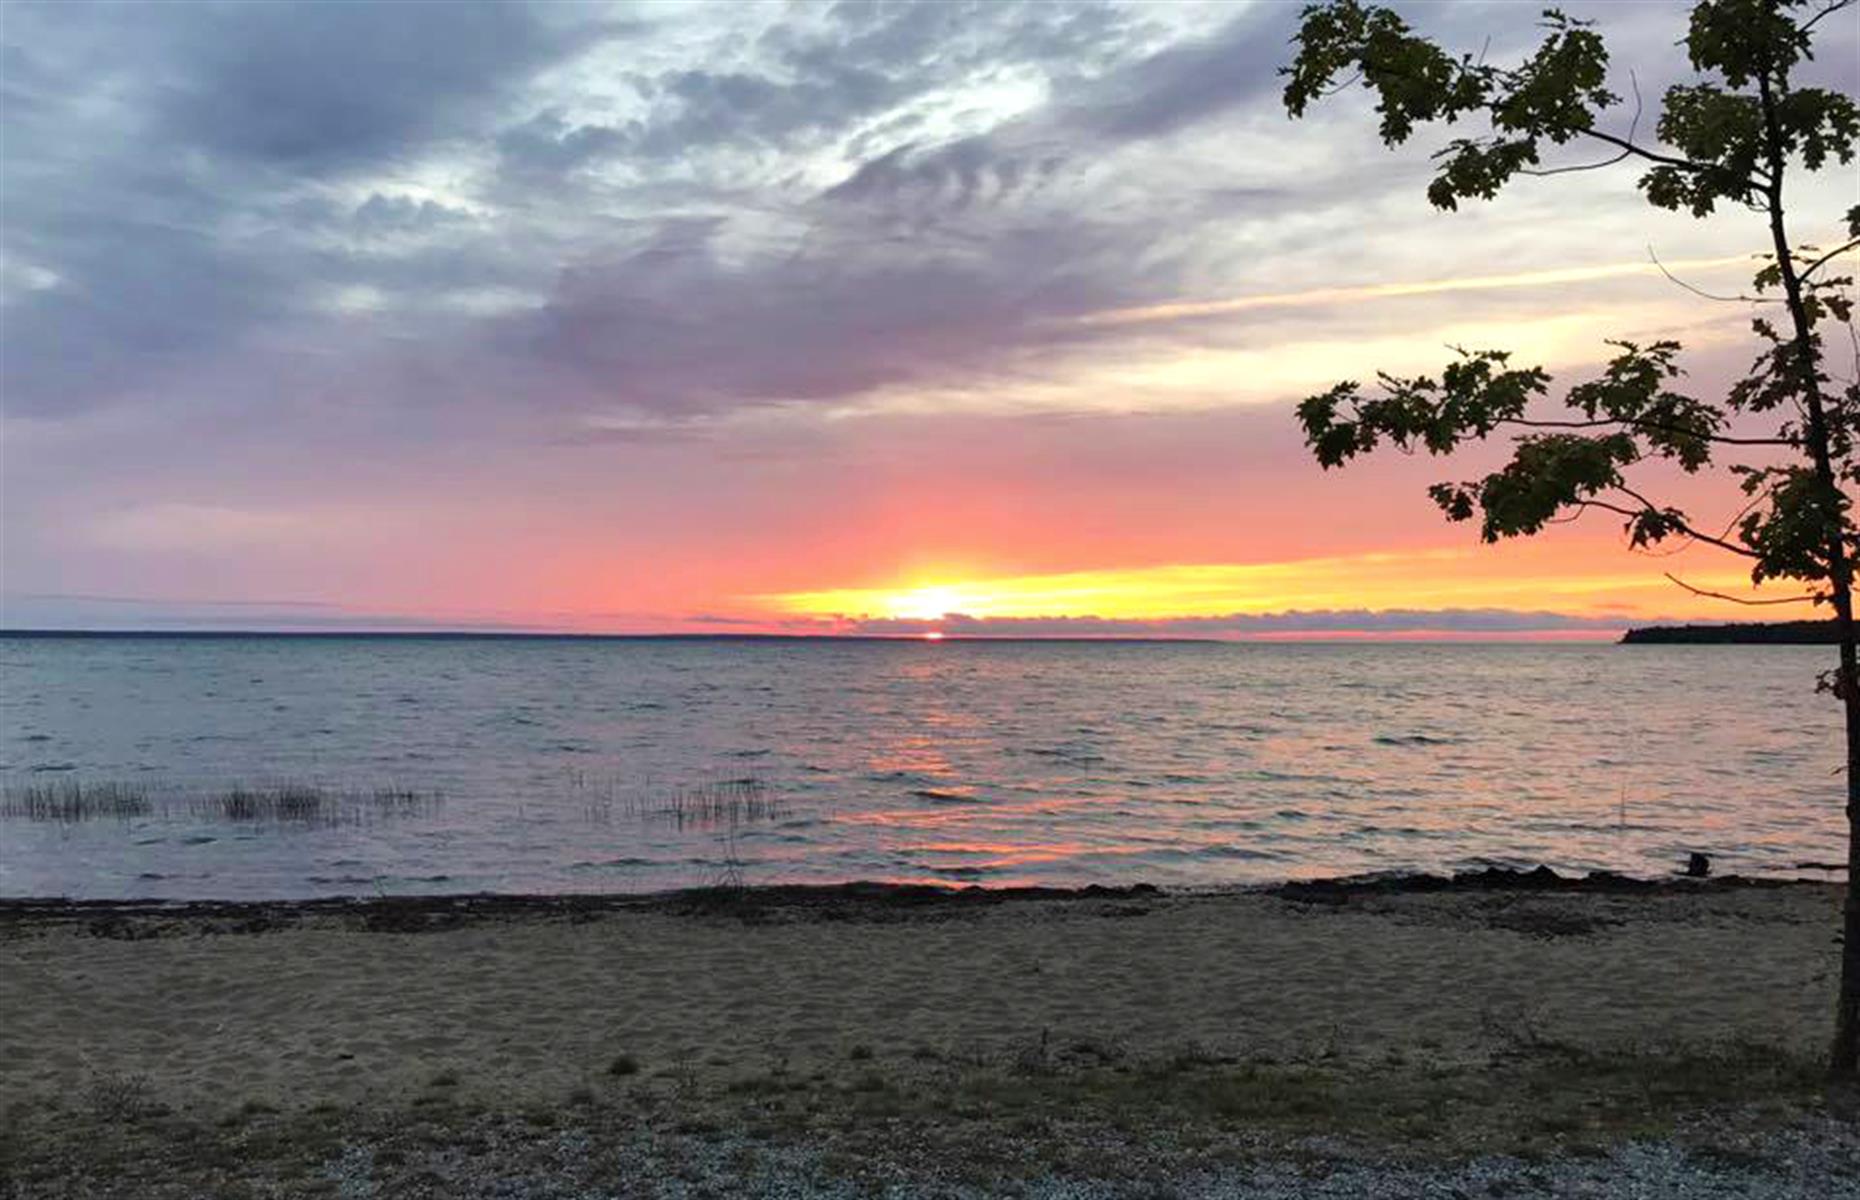 <p><a href="http://www.campmackinaw.com/">The sprawling Mackinaw Mill Creek Campground</a> is no stranger to the spotlight, having won various accolades over the years. The site has been in the same family since the 1960s, and they're proud of its rugged grounds filled with wildflowers, and the stunning views of Mackinac Island. The park has more than 200 full hook-up sites, plus extras such as a heated pool, mini golf and bike rentals. Typically a ferry takes guests out to Mackinac Island – check the <a href="https://www.mackinacferry.com/covid-updates/">ferry website</a> for updates and schedules. </p>